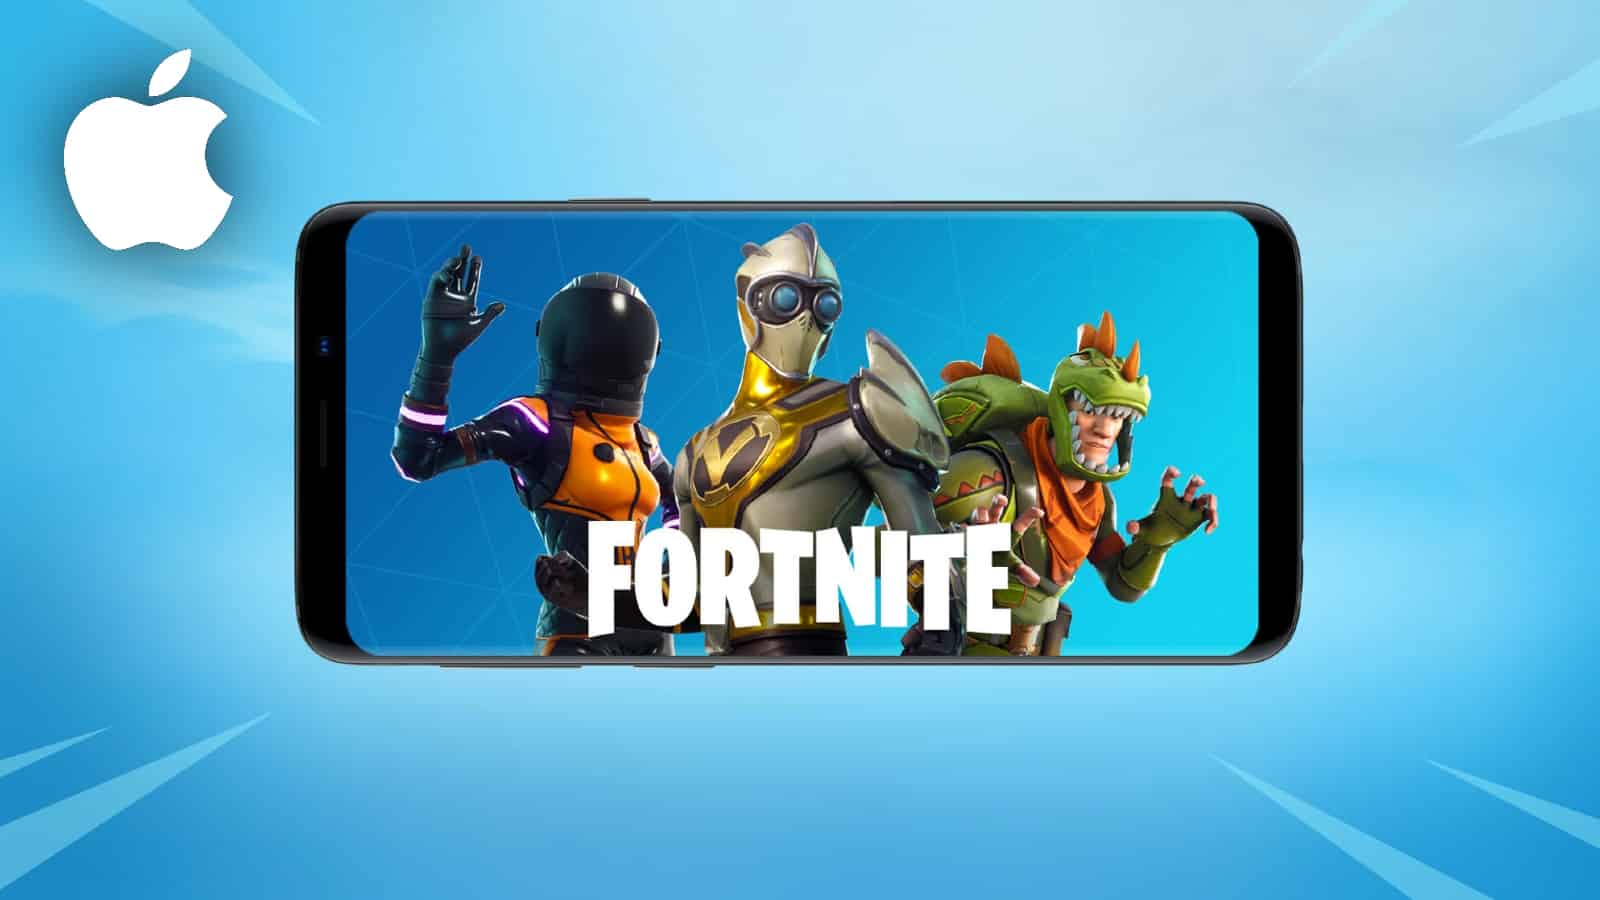 Fortnite on an Android phone with apple logo in corner